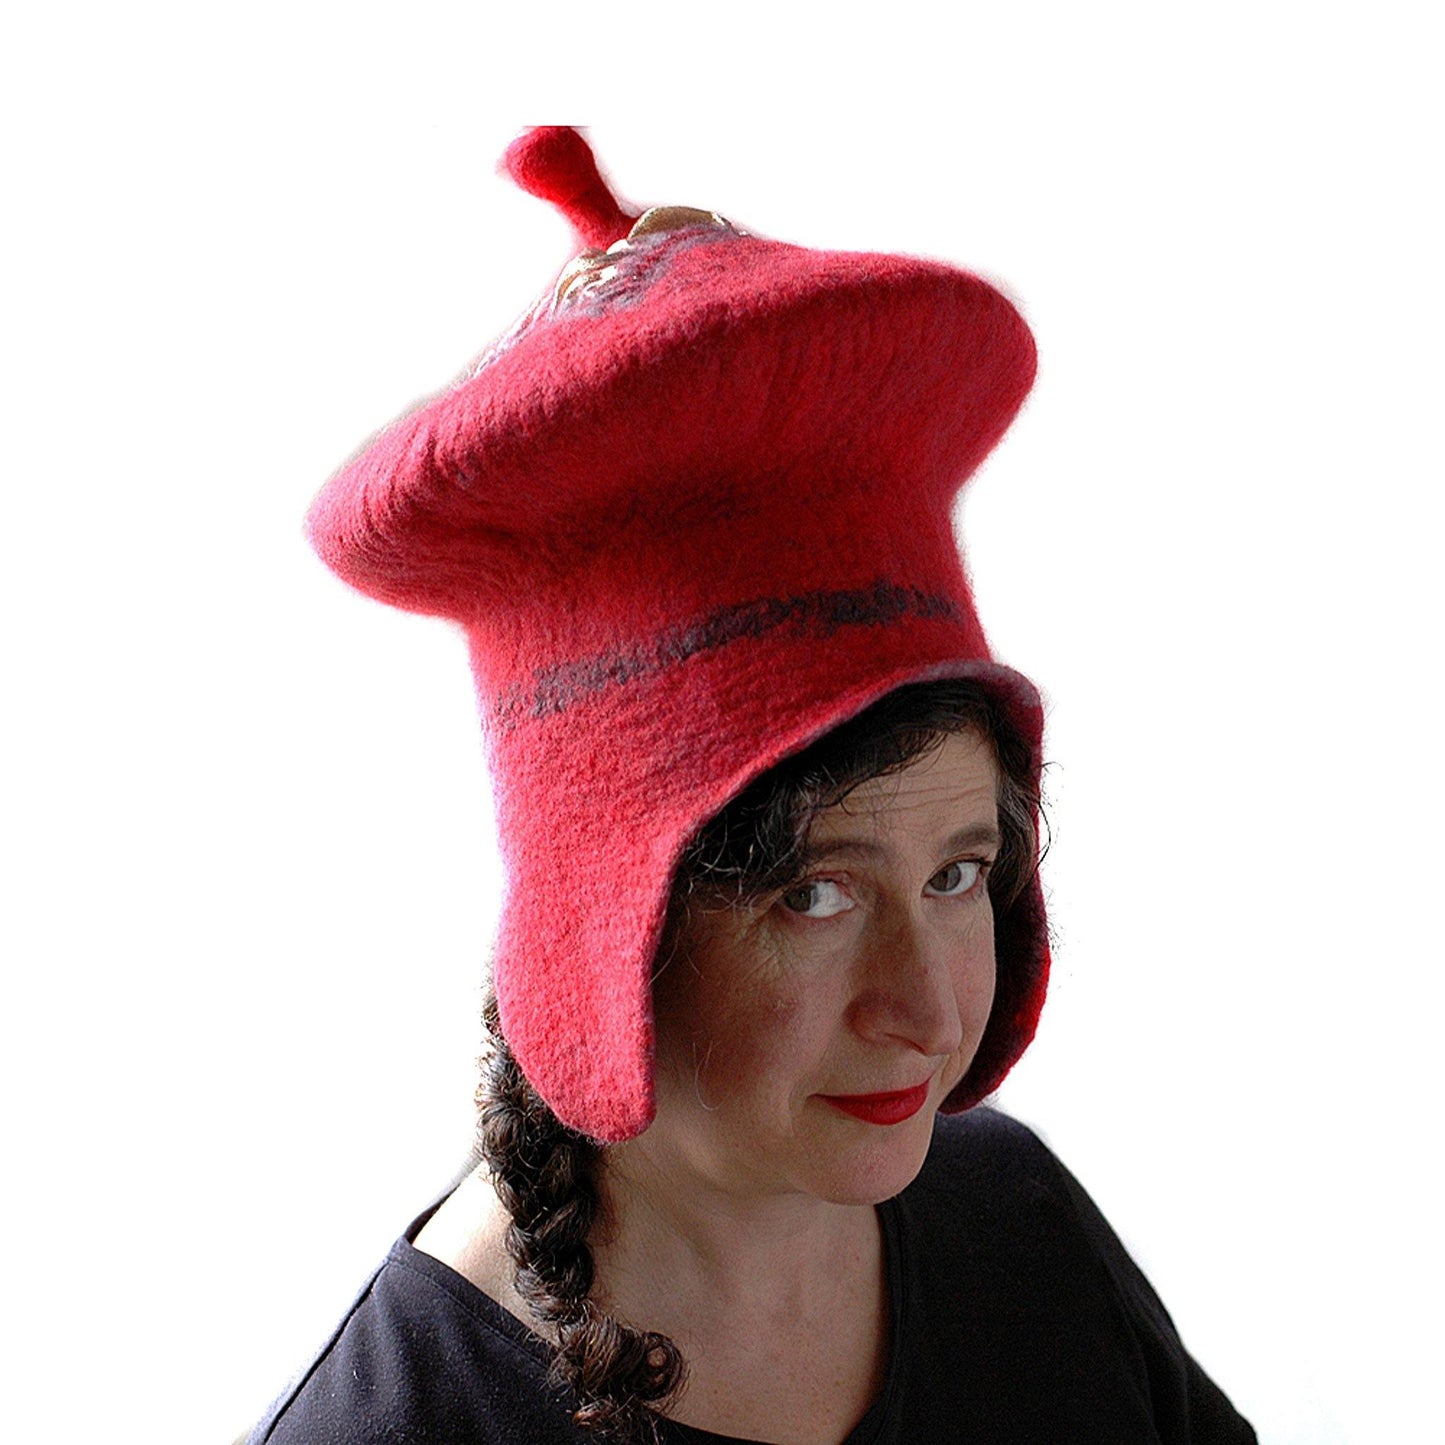 Watermelon Red Sci Fi Mushroom Wizard Hat with Earflaps - side view 2